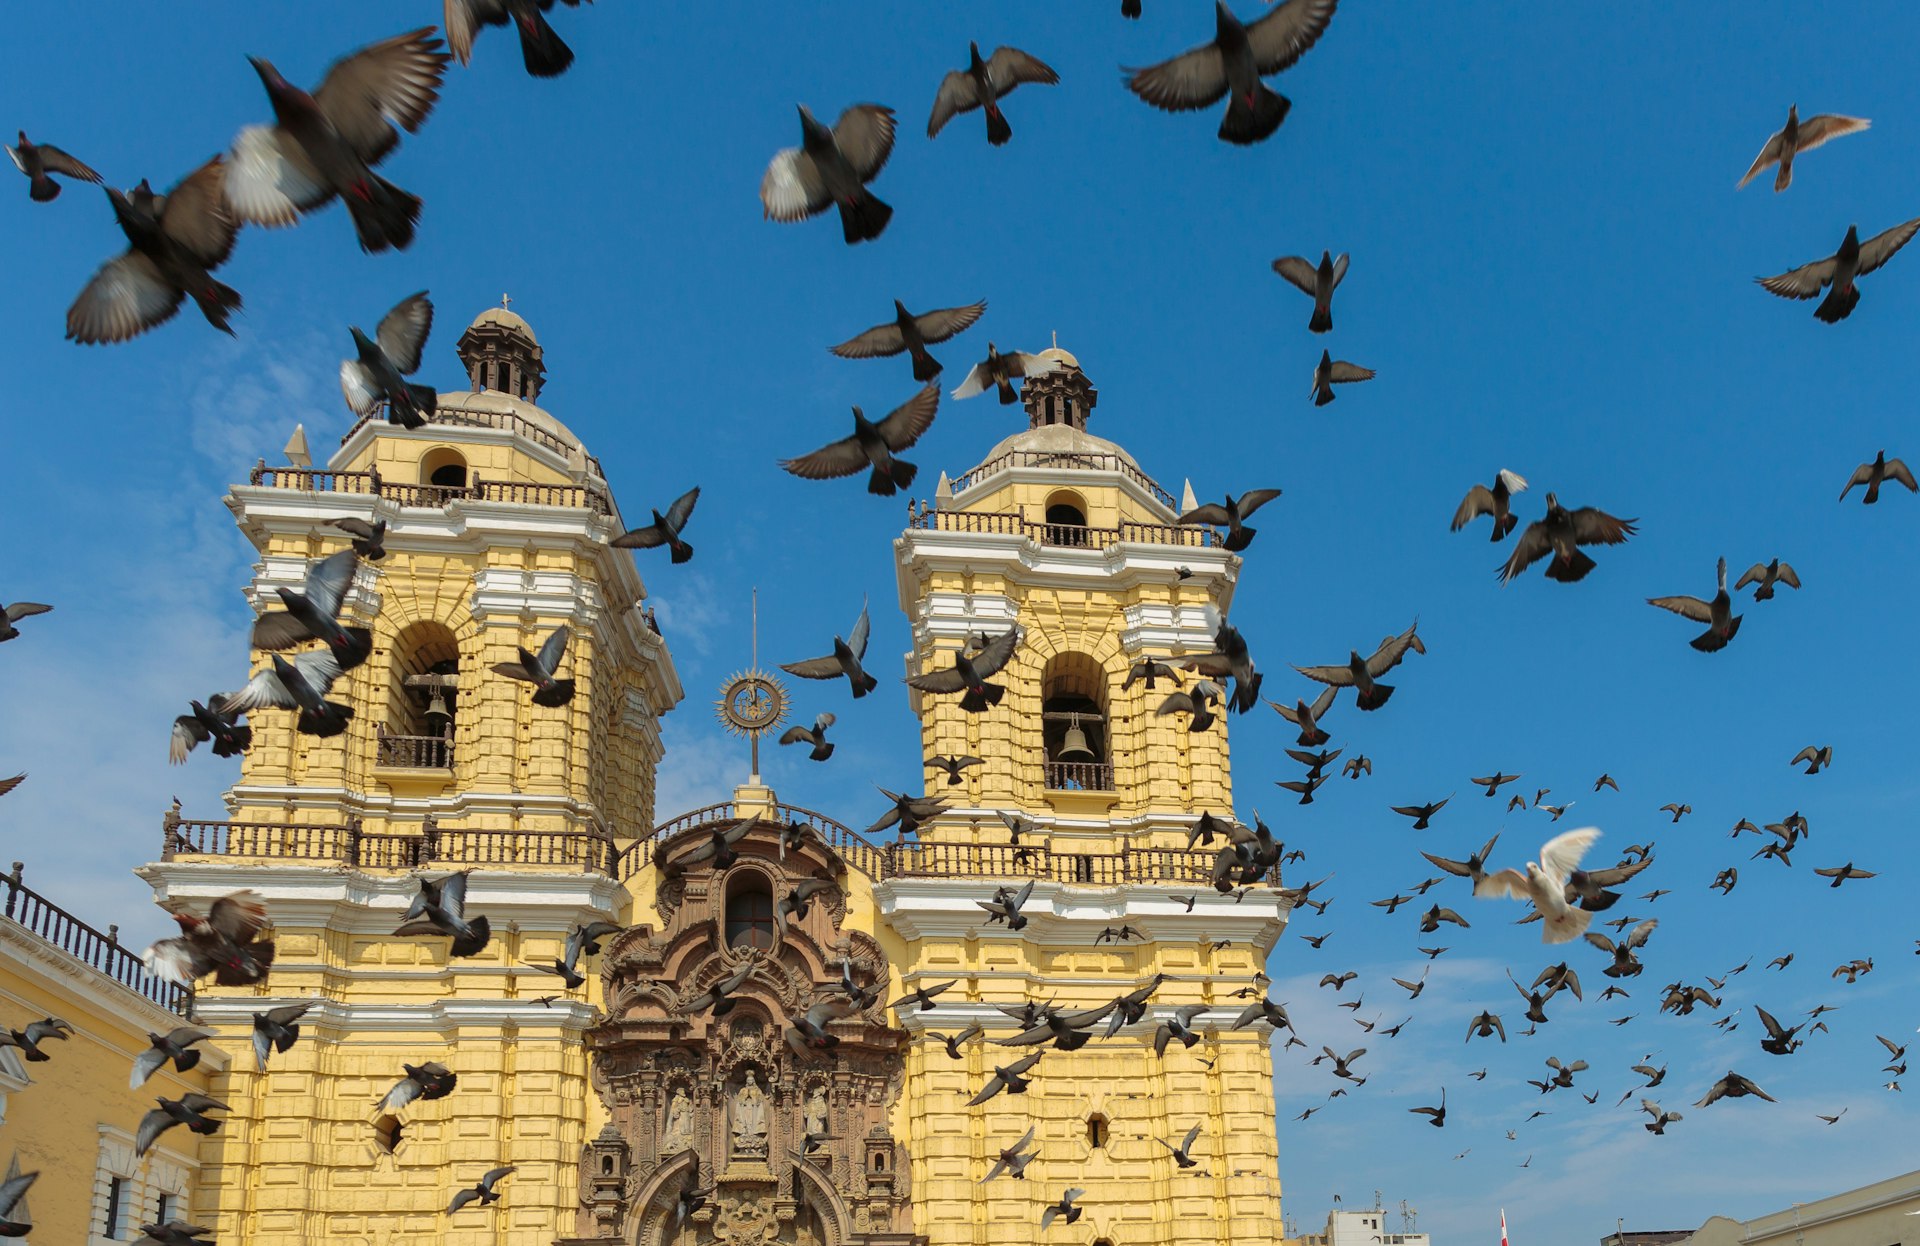 A flock of pigeons fly upwards into a blue sky above a yellow church building with two prominent bell towers